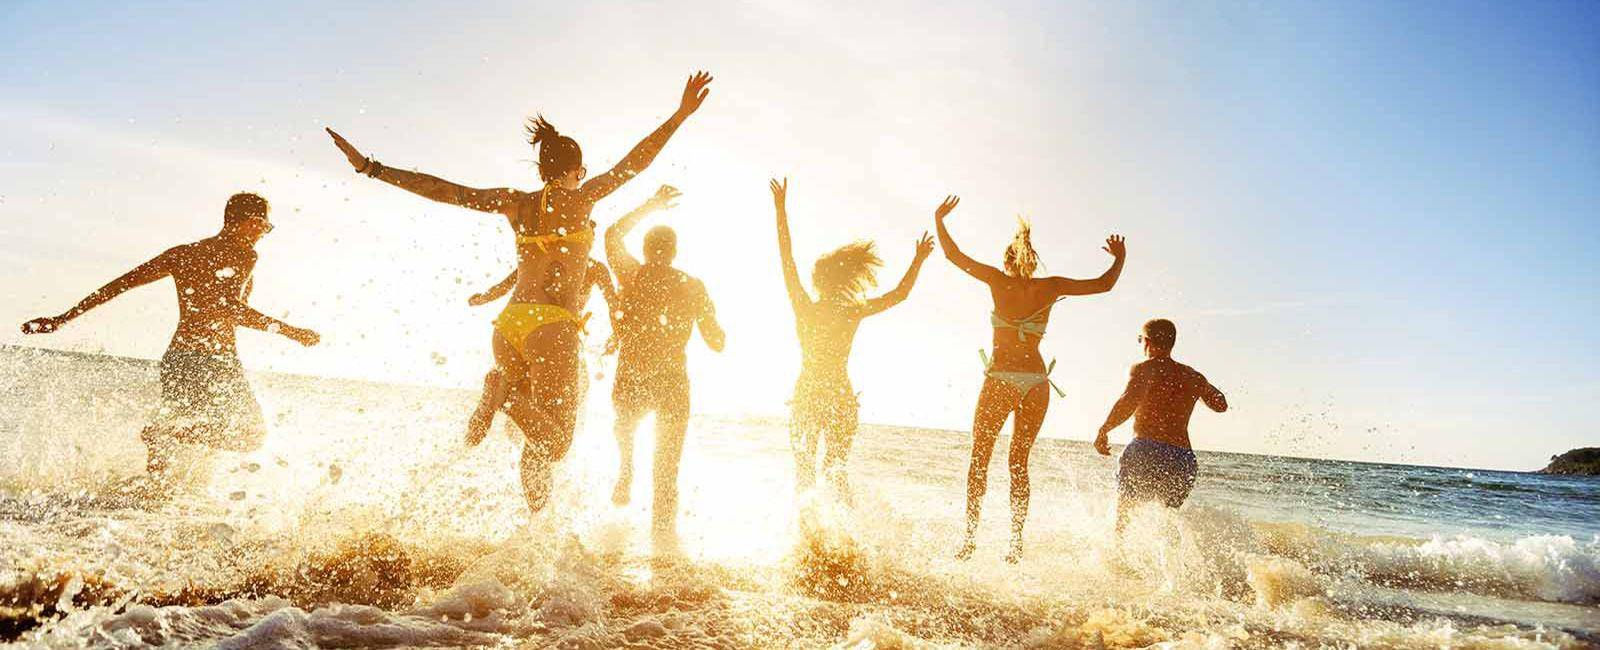 Group of friends running into the ocean | Top tips for travelling in a large group while keeping friendships intact